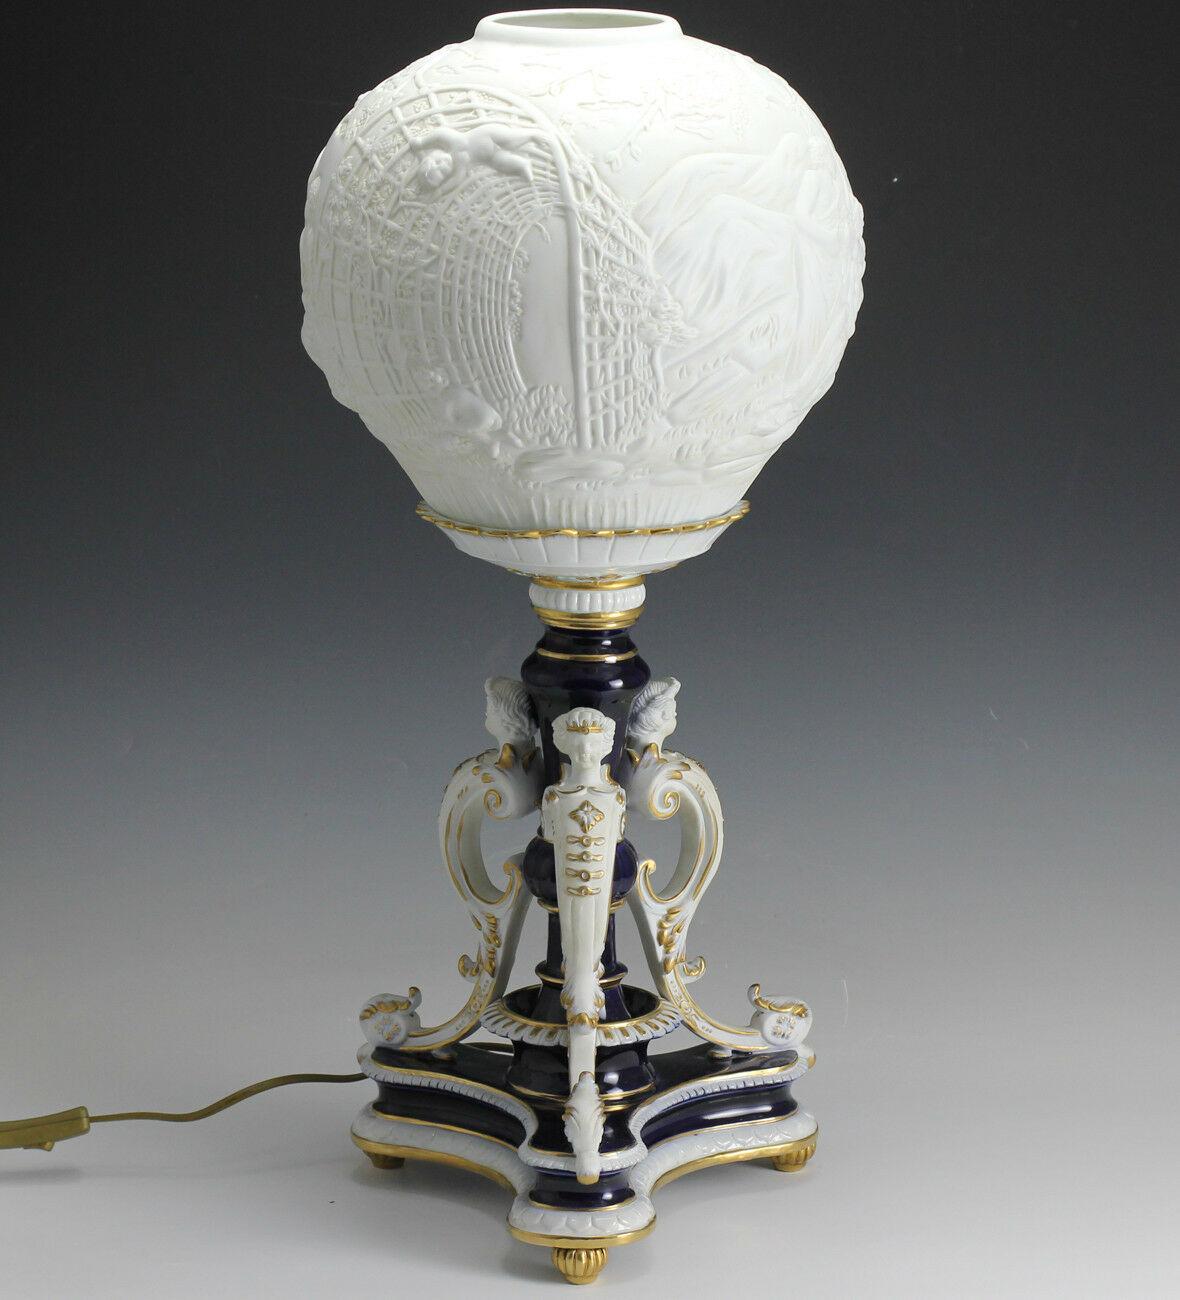 German Footed Porcelain Lamp, White Bisque Shade w/ Putti, Figures, 20th Century In Good Condition For Sale In Gardena, CA